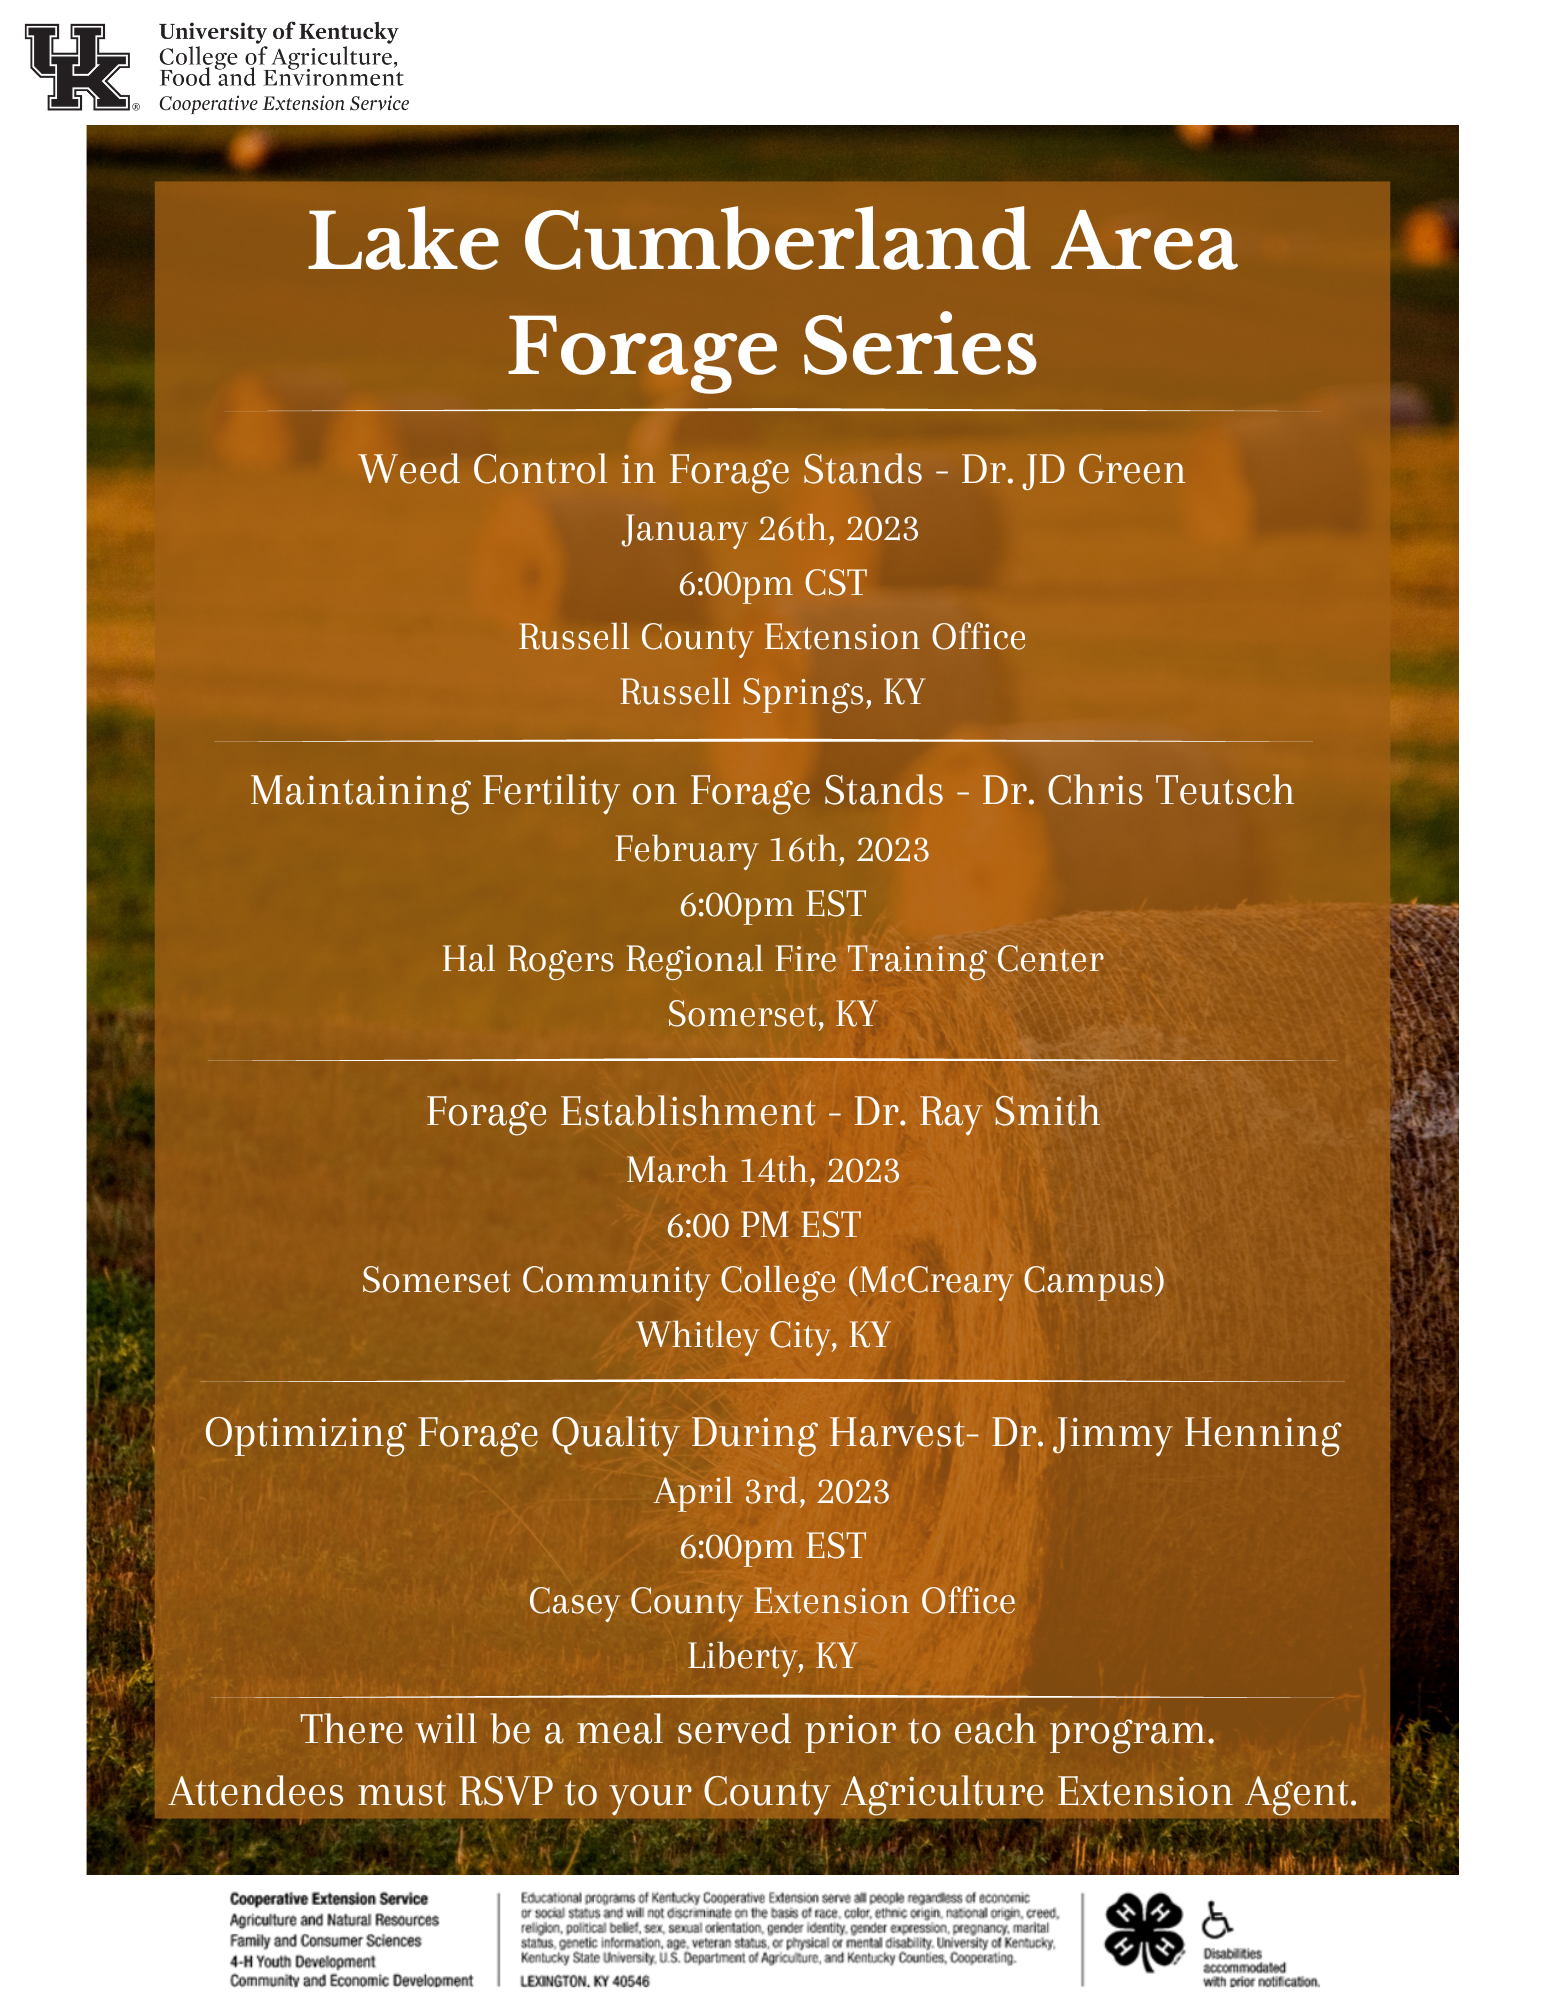 flyer for lake cumberland area forage series starts January 26th, meets monthly different locations through April 3rd